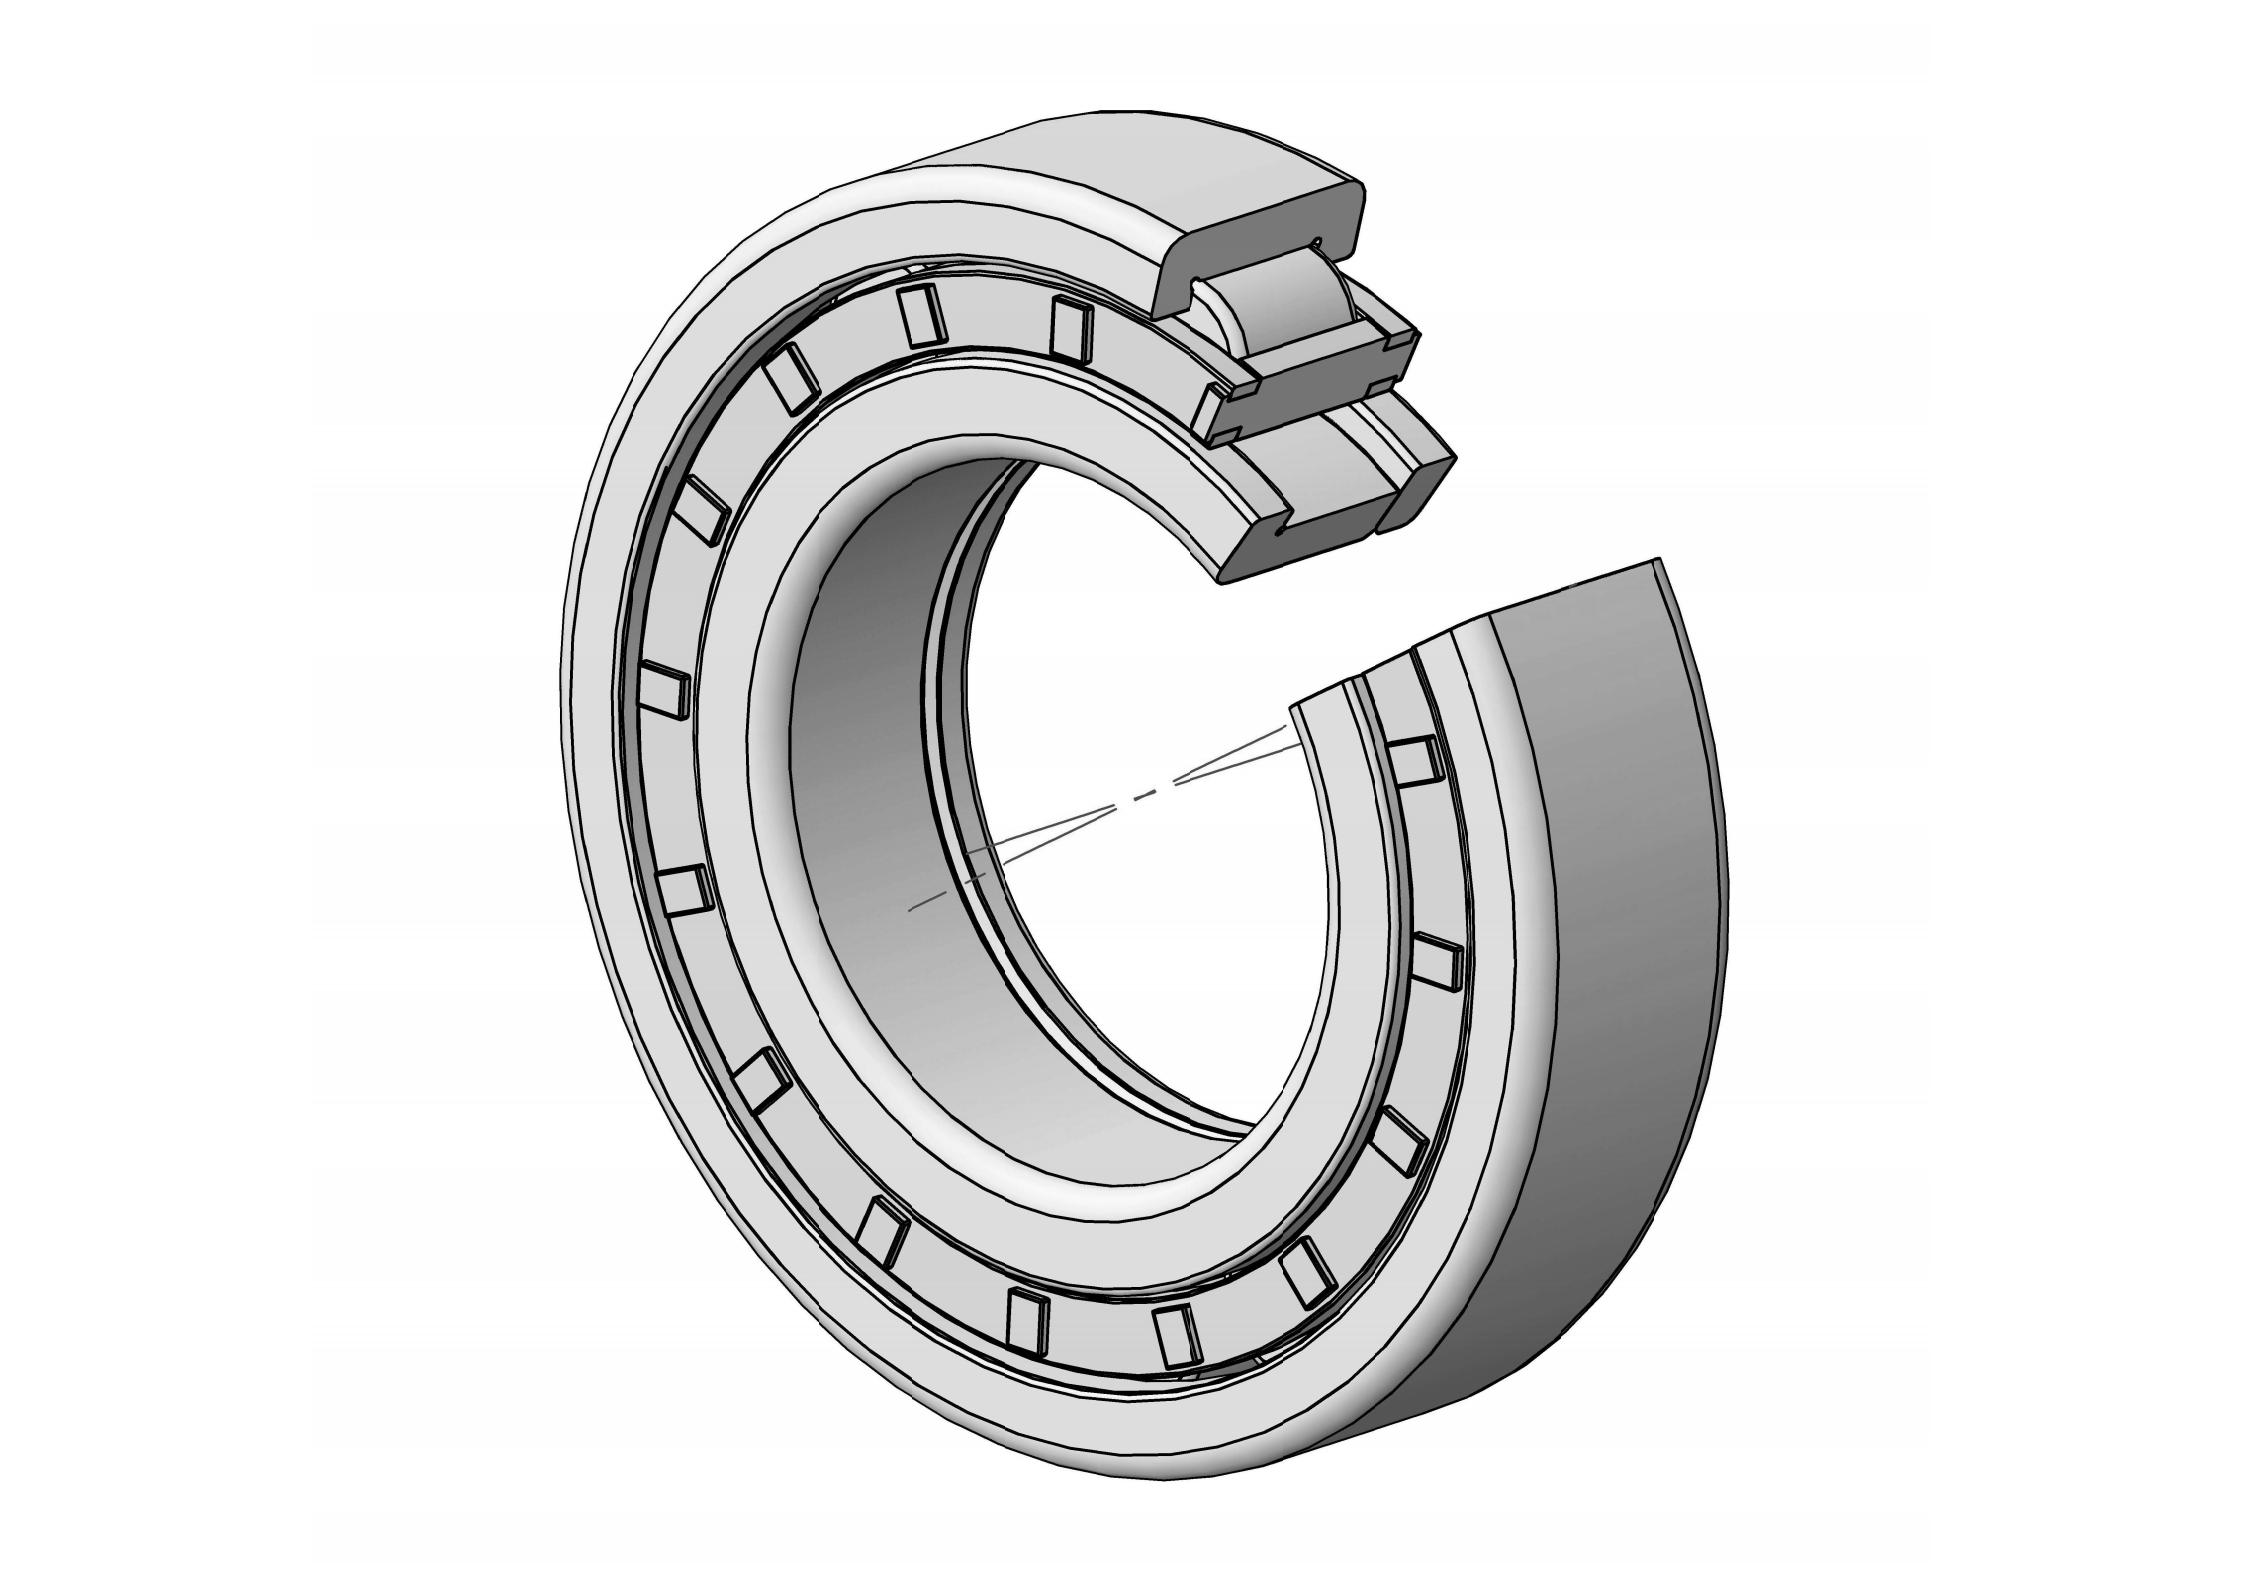 NUP2244-EXM Single Row Cylindrical roller bearing 